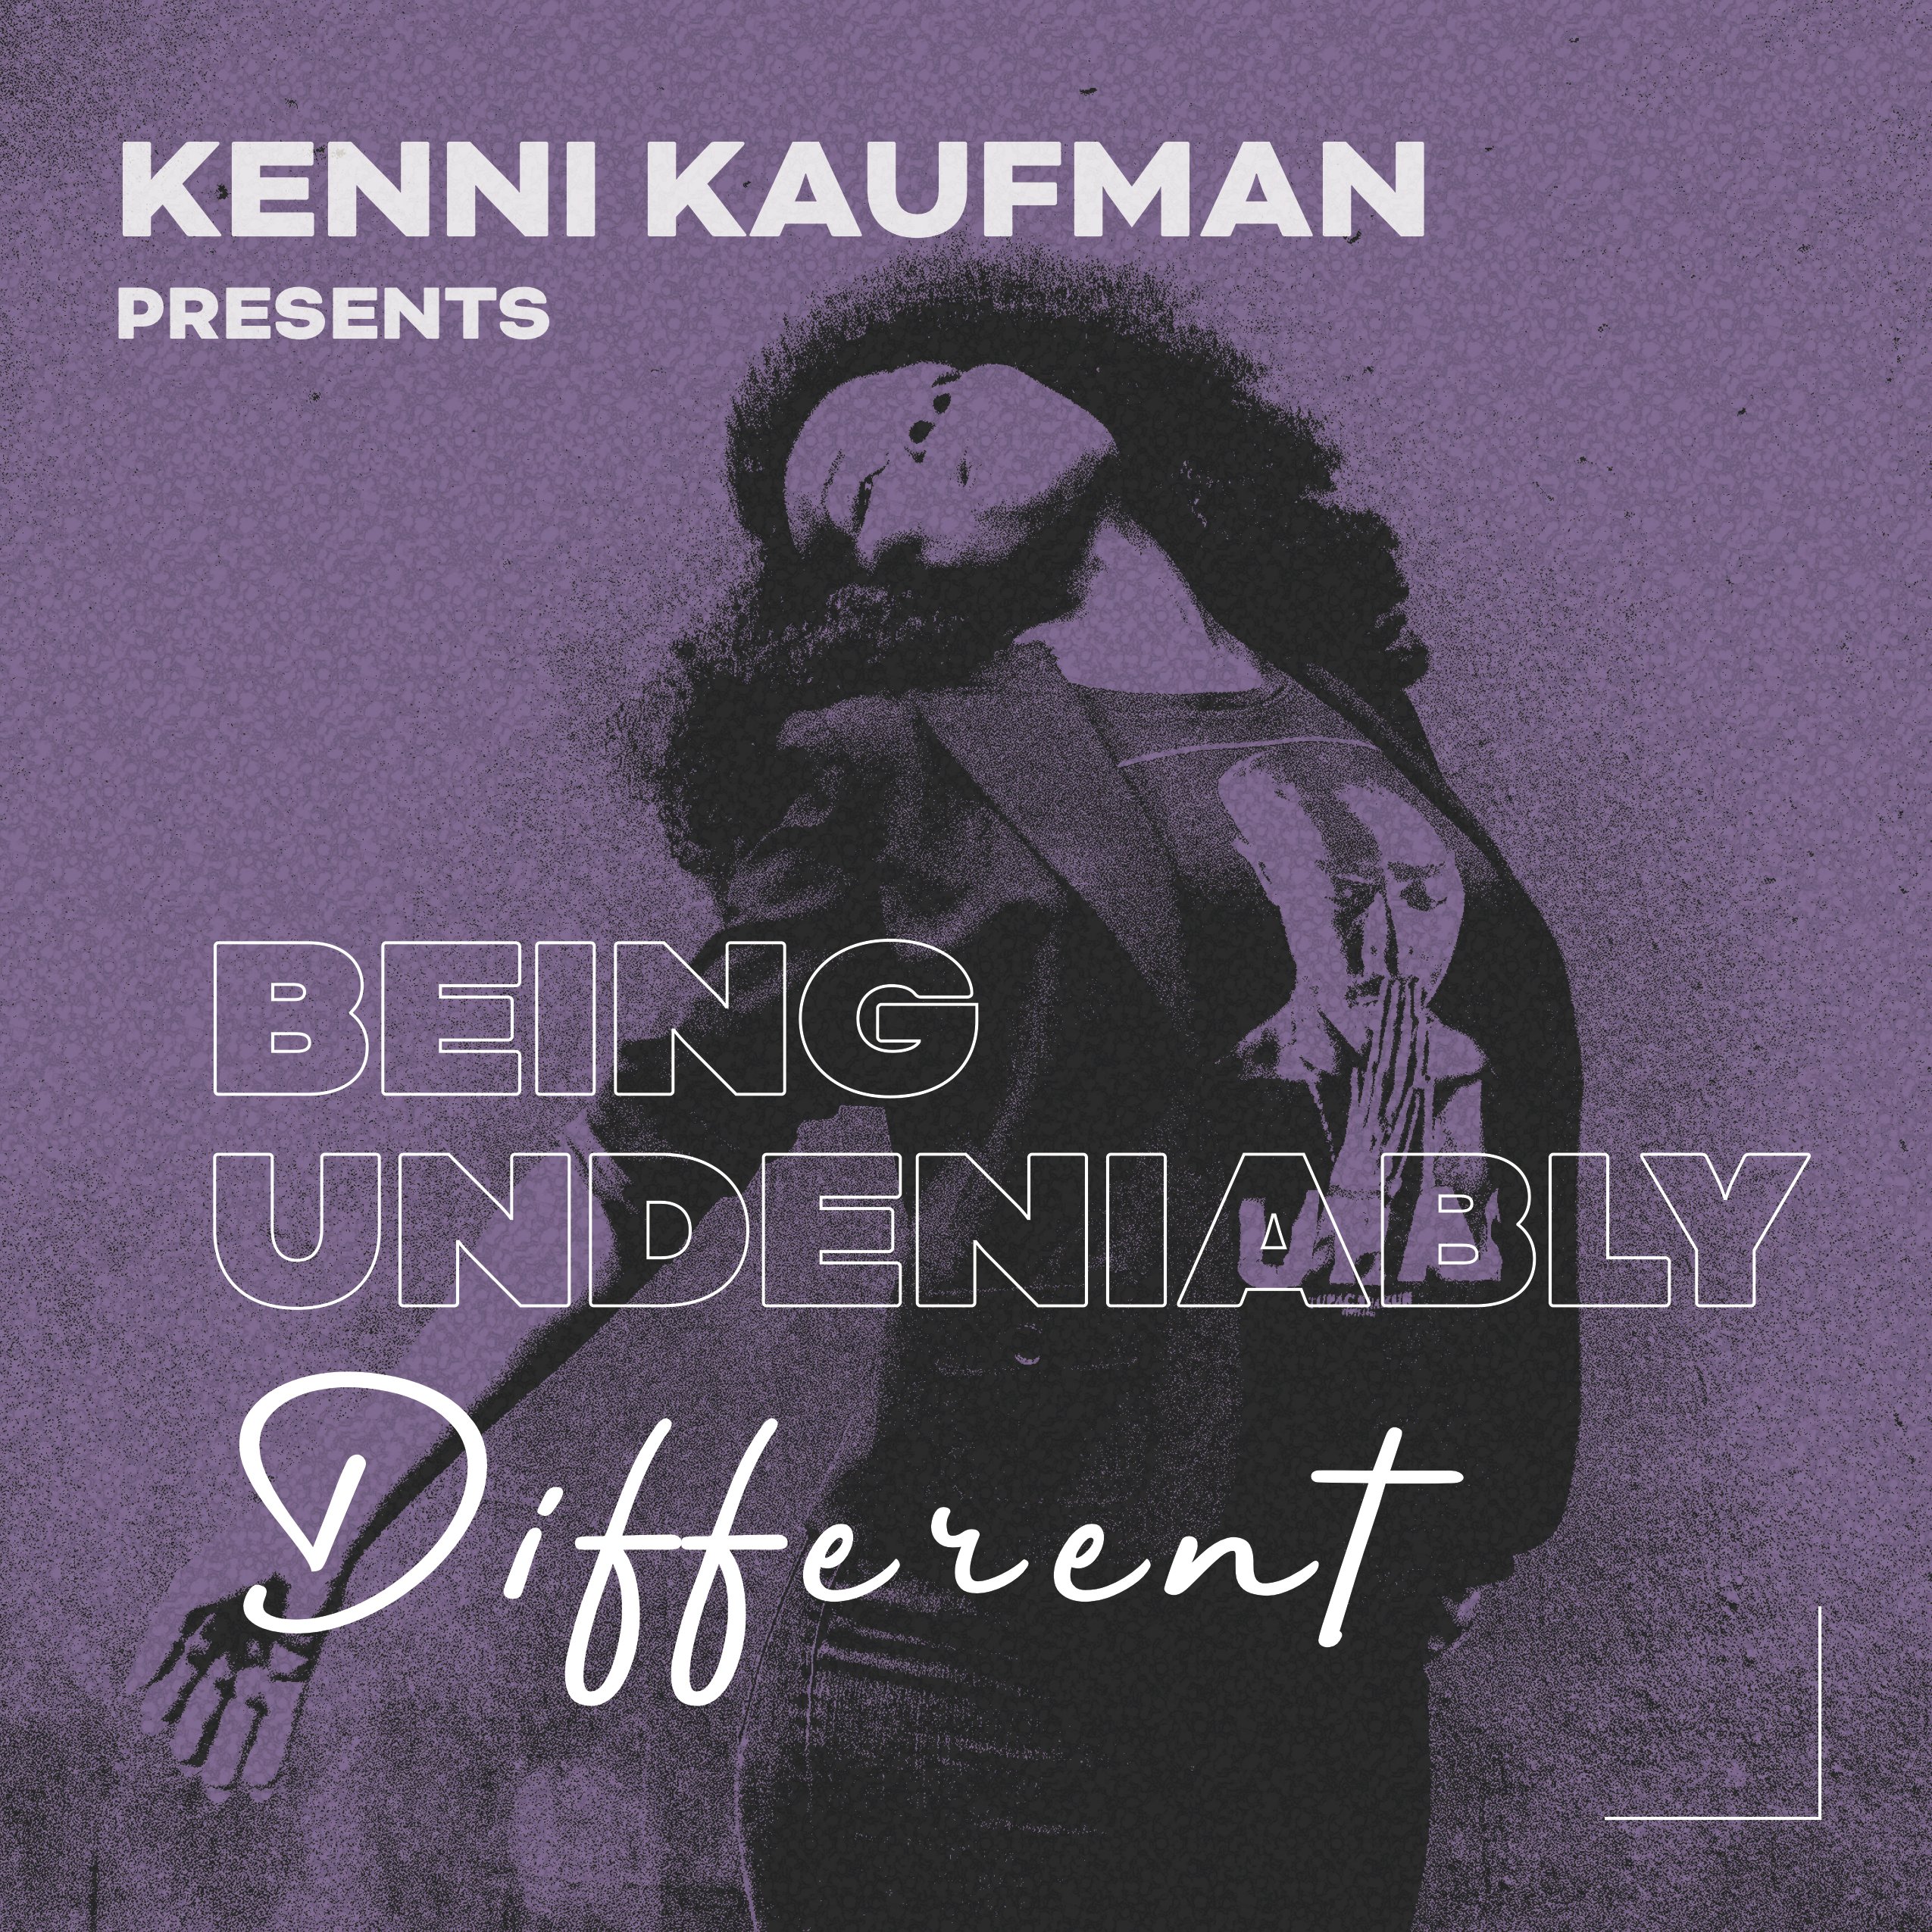 An Undeniably Different Performance Lecture Presented by Kenni Kaufman